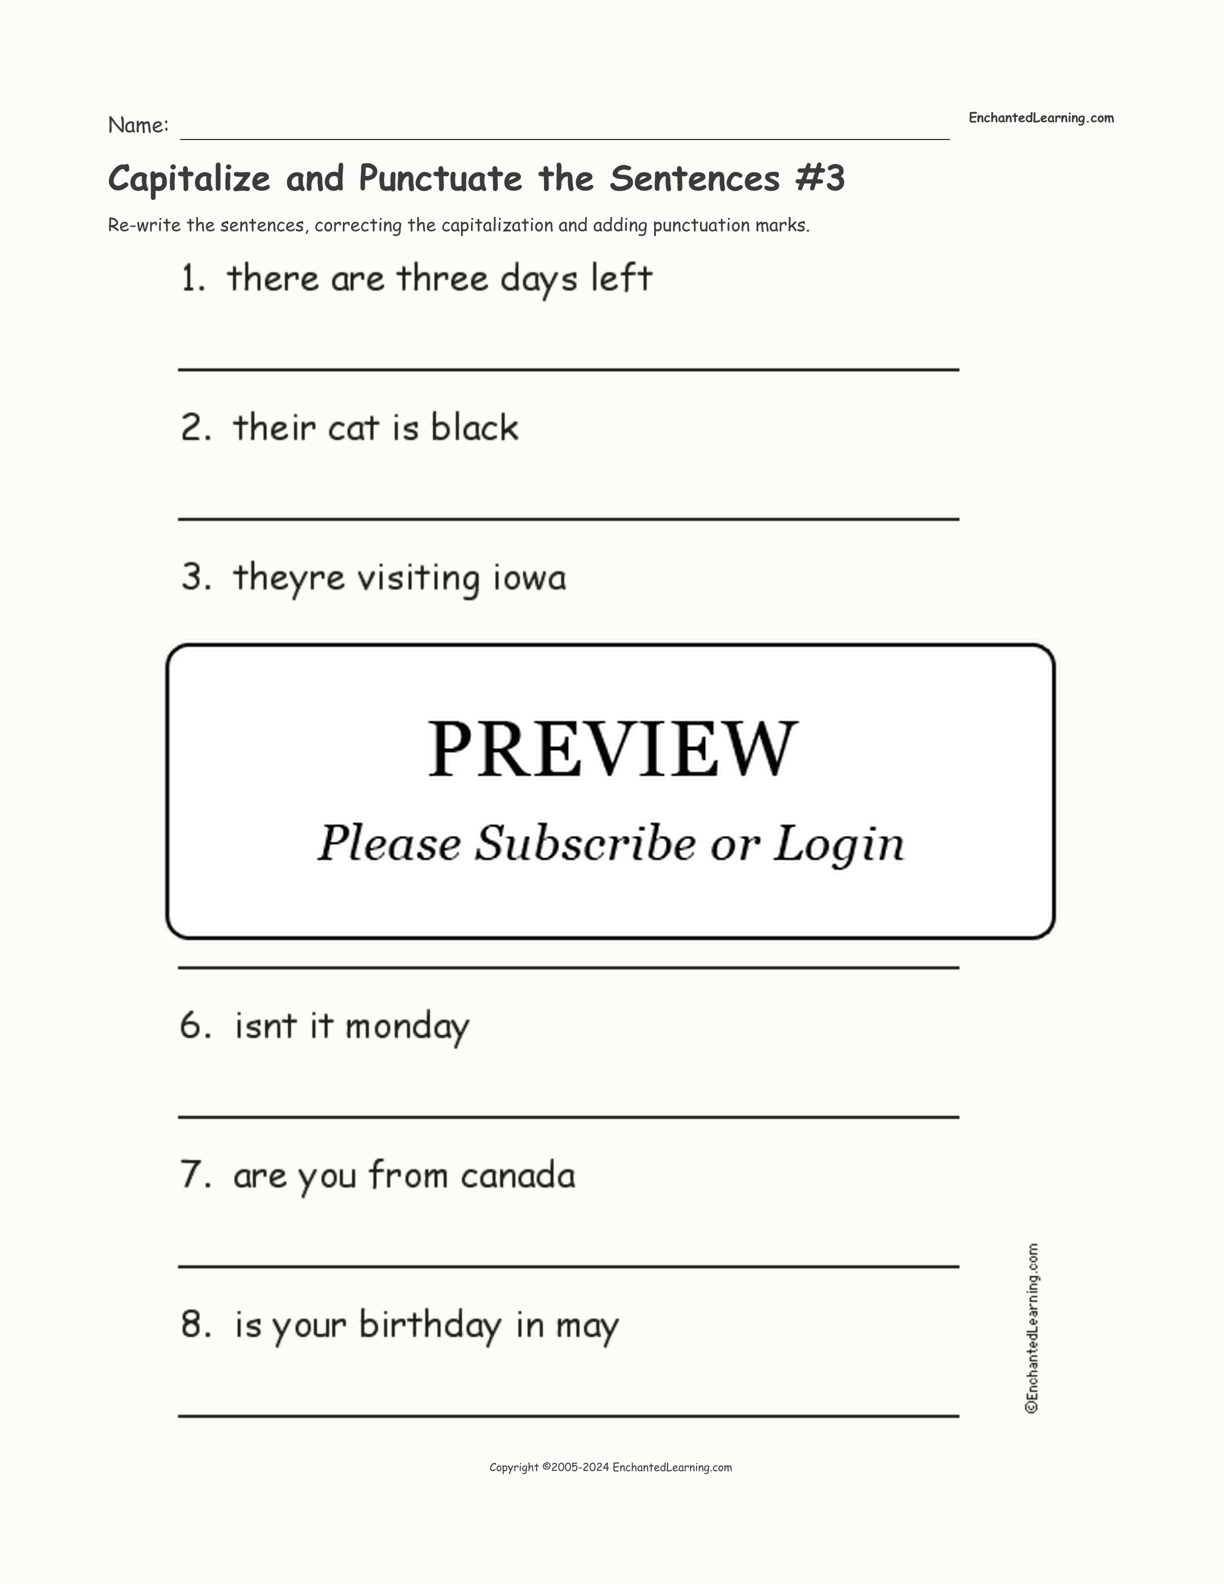 Capitalize and Punctuate the Sentences #3 interactive worksheet page 1